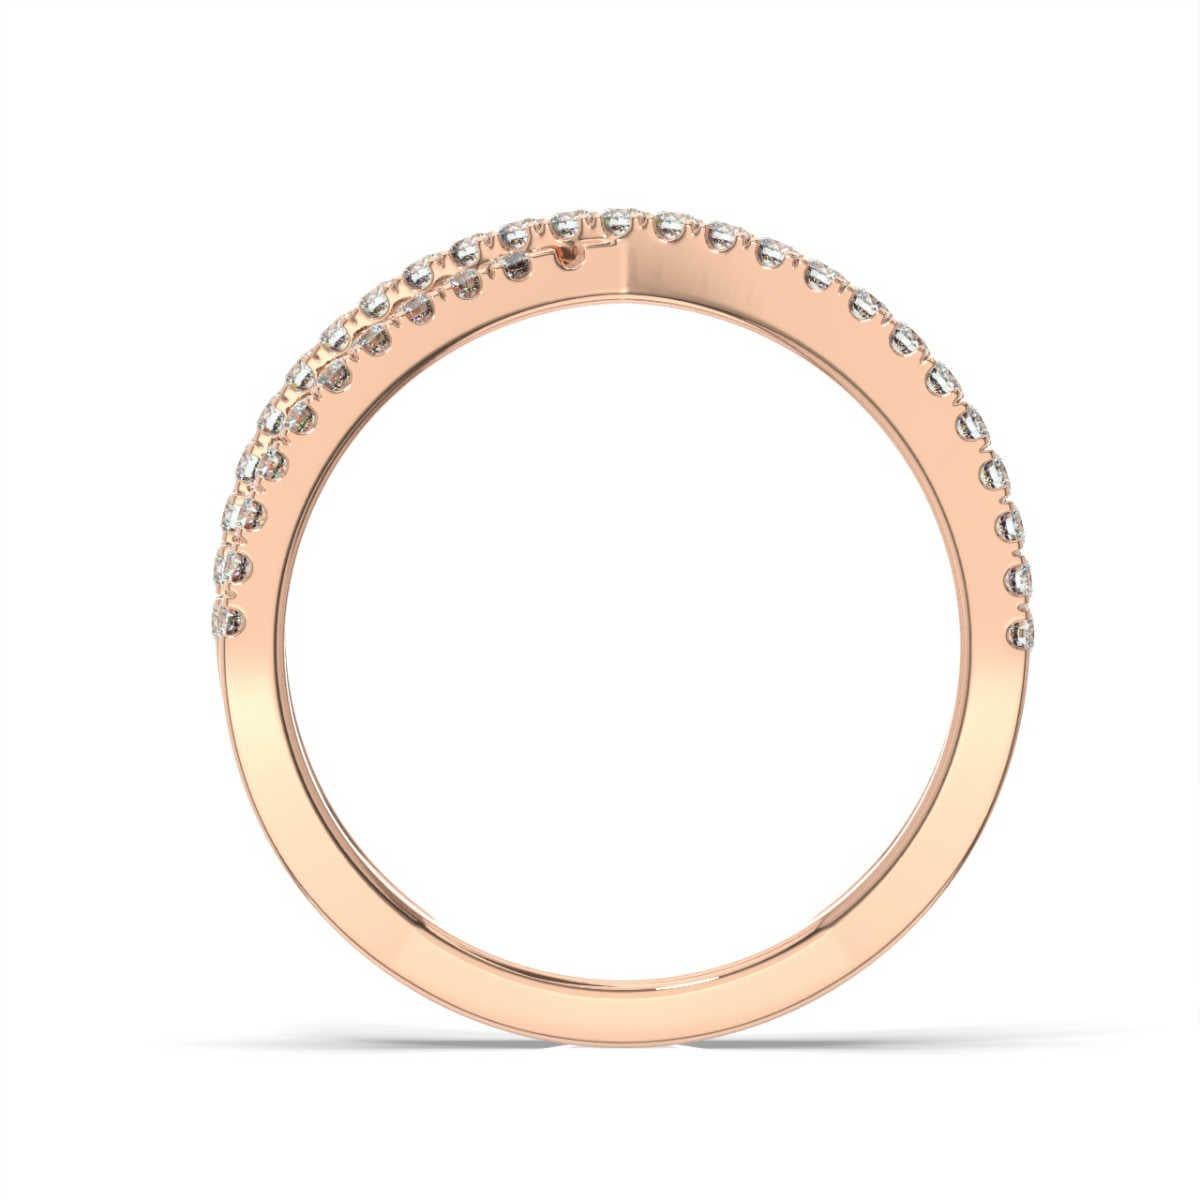 Two petite bands of micro prong set diamonds to wrap interweave each other in this contemporary ring.

Product details: 

Center Gemstone Color: WHITE
Side Gemstone Type: NATURAL DIAMOND
Side Gemstone Shape: ROUND
Metal: 14K Rose Gold
Metal Weight: